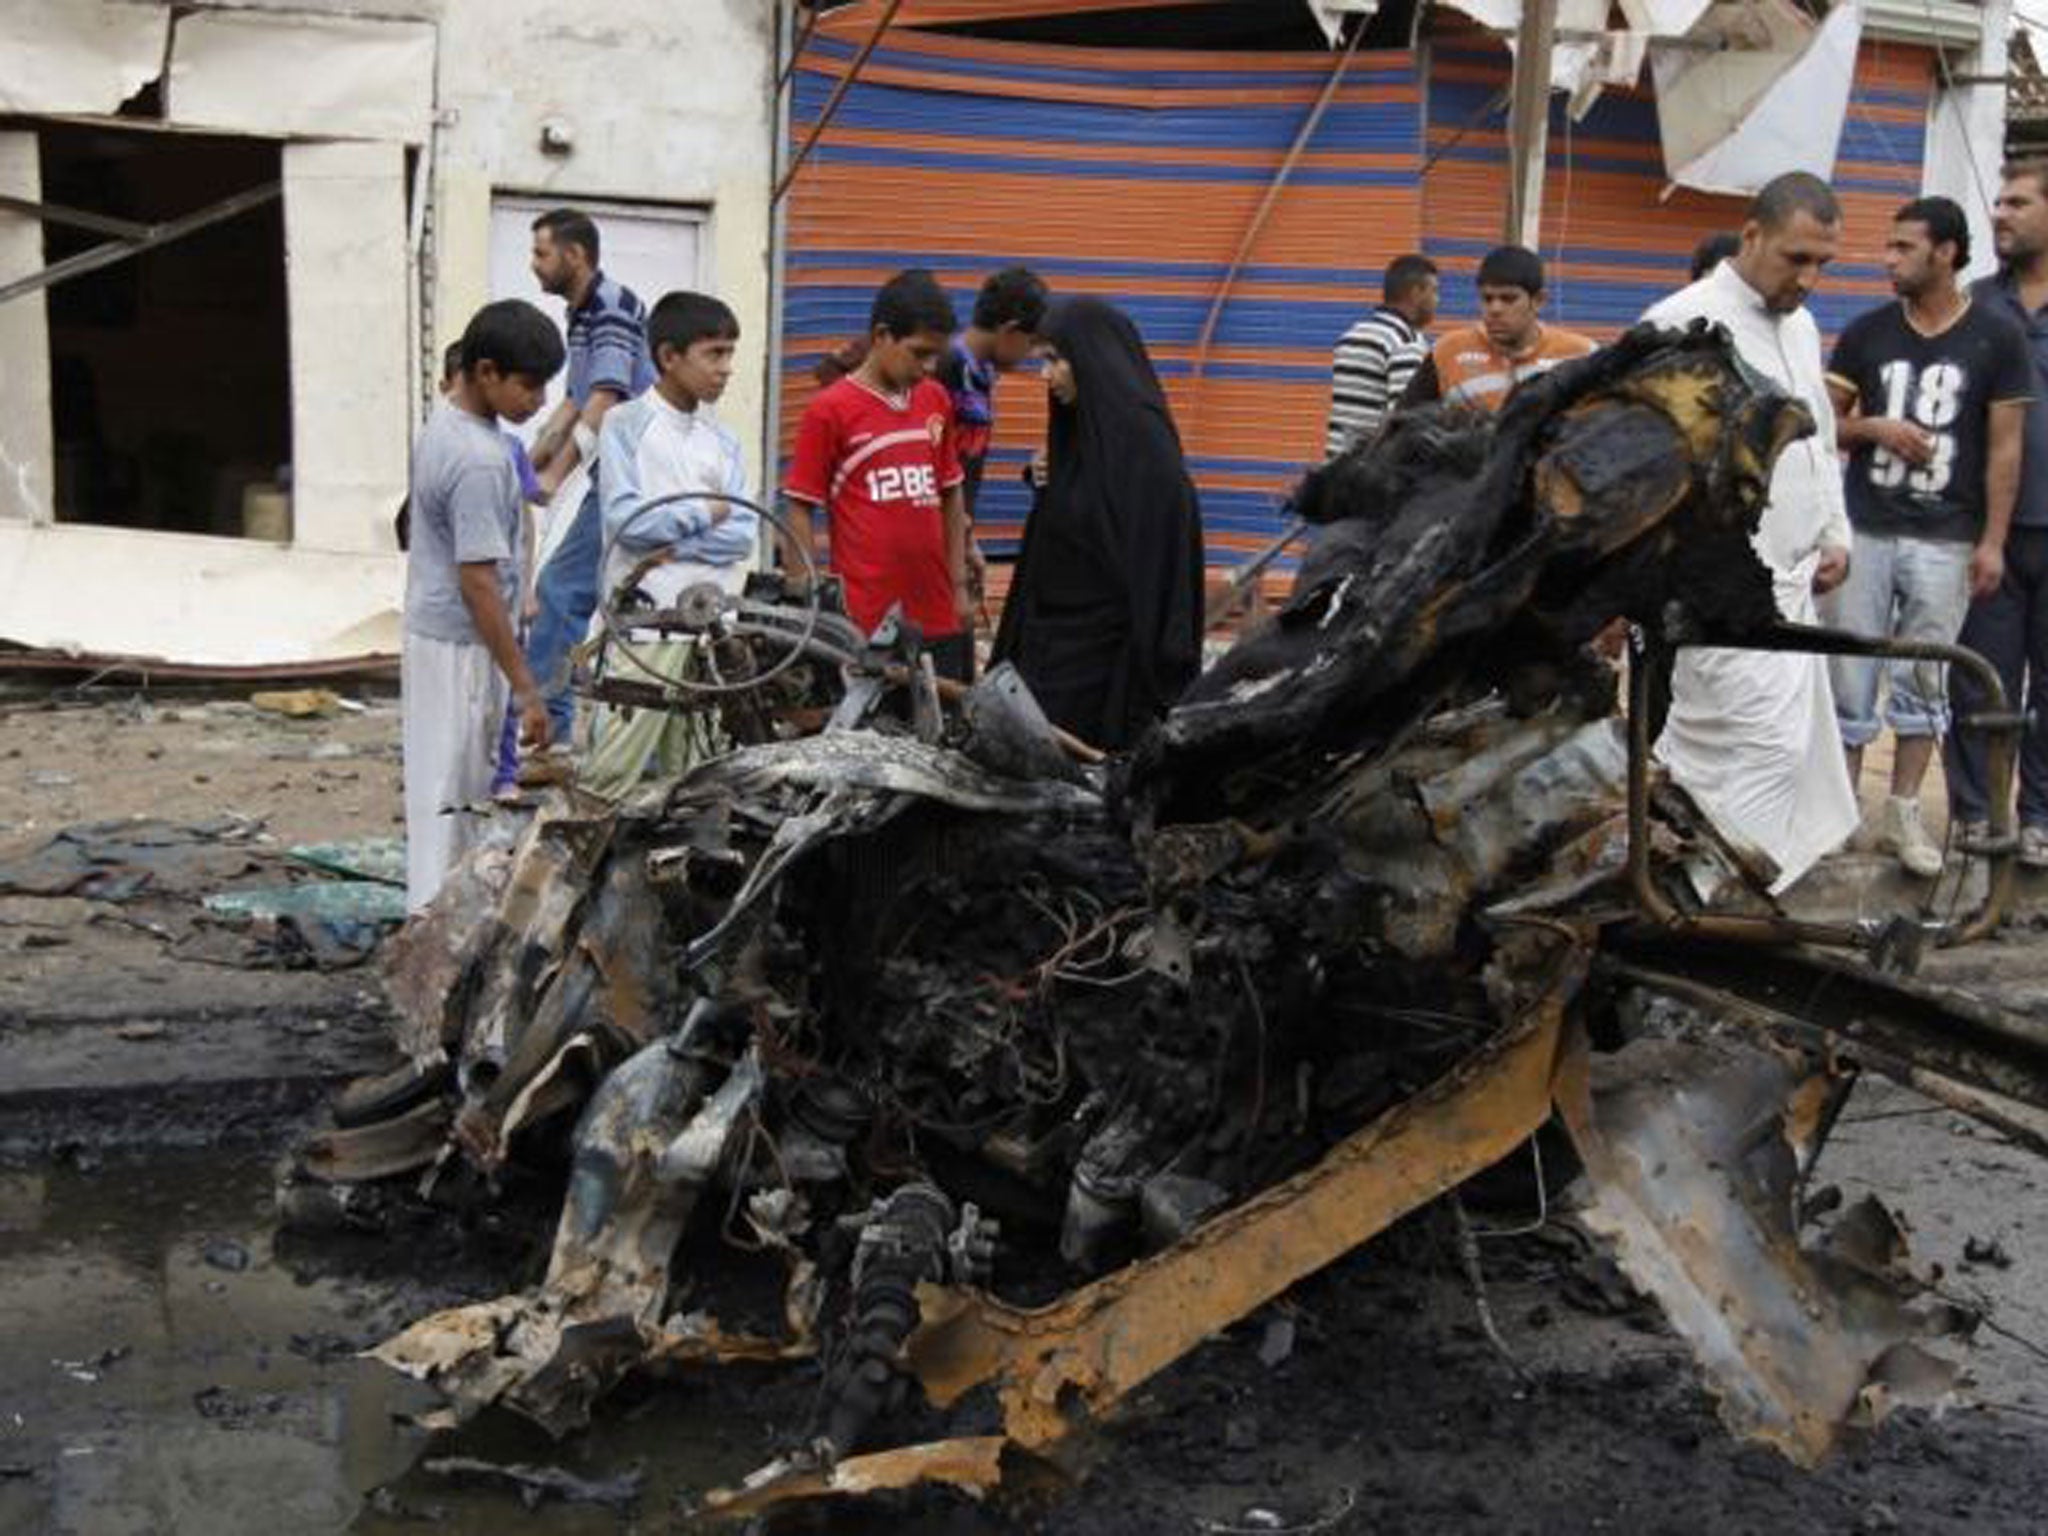 Residents gather at the site of a car bomb attack at the Kamaliya district in Baghdad